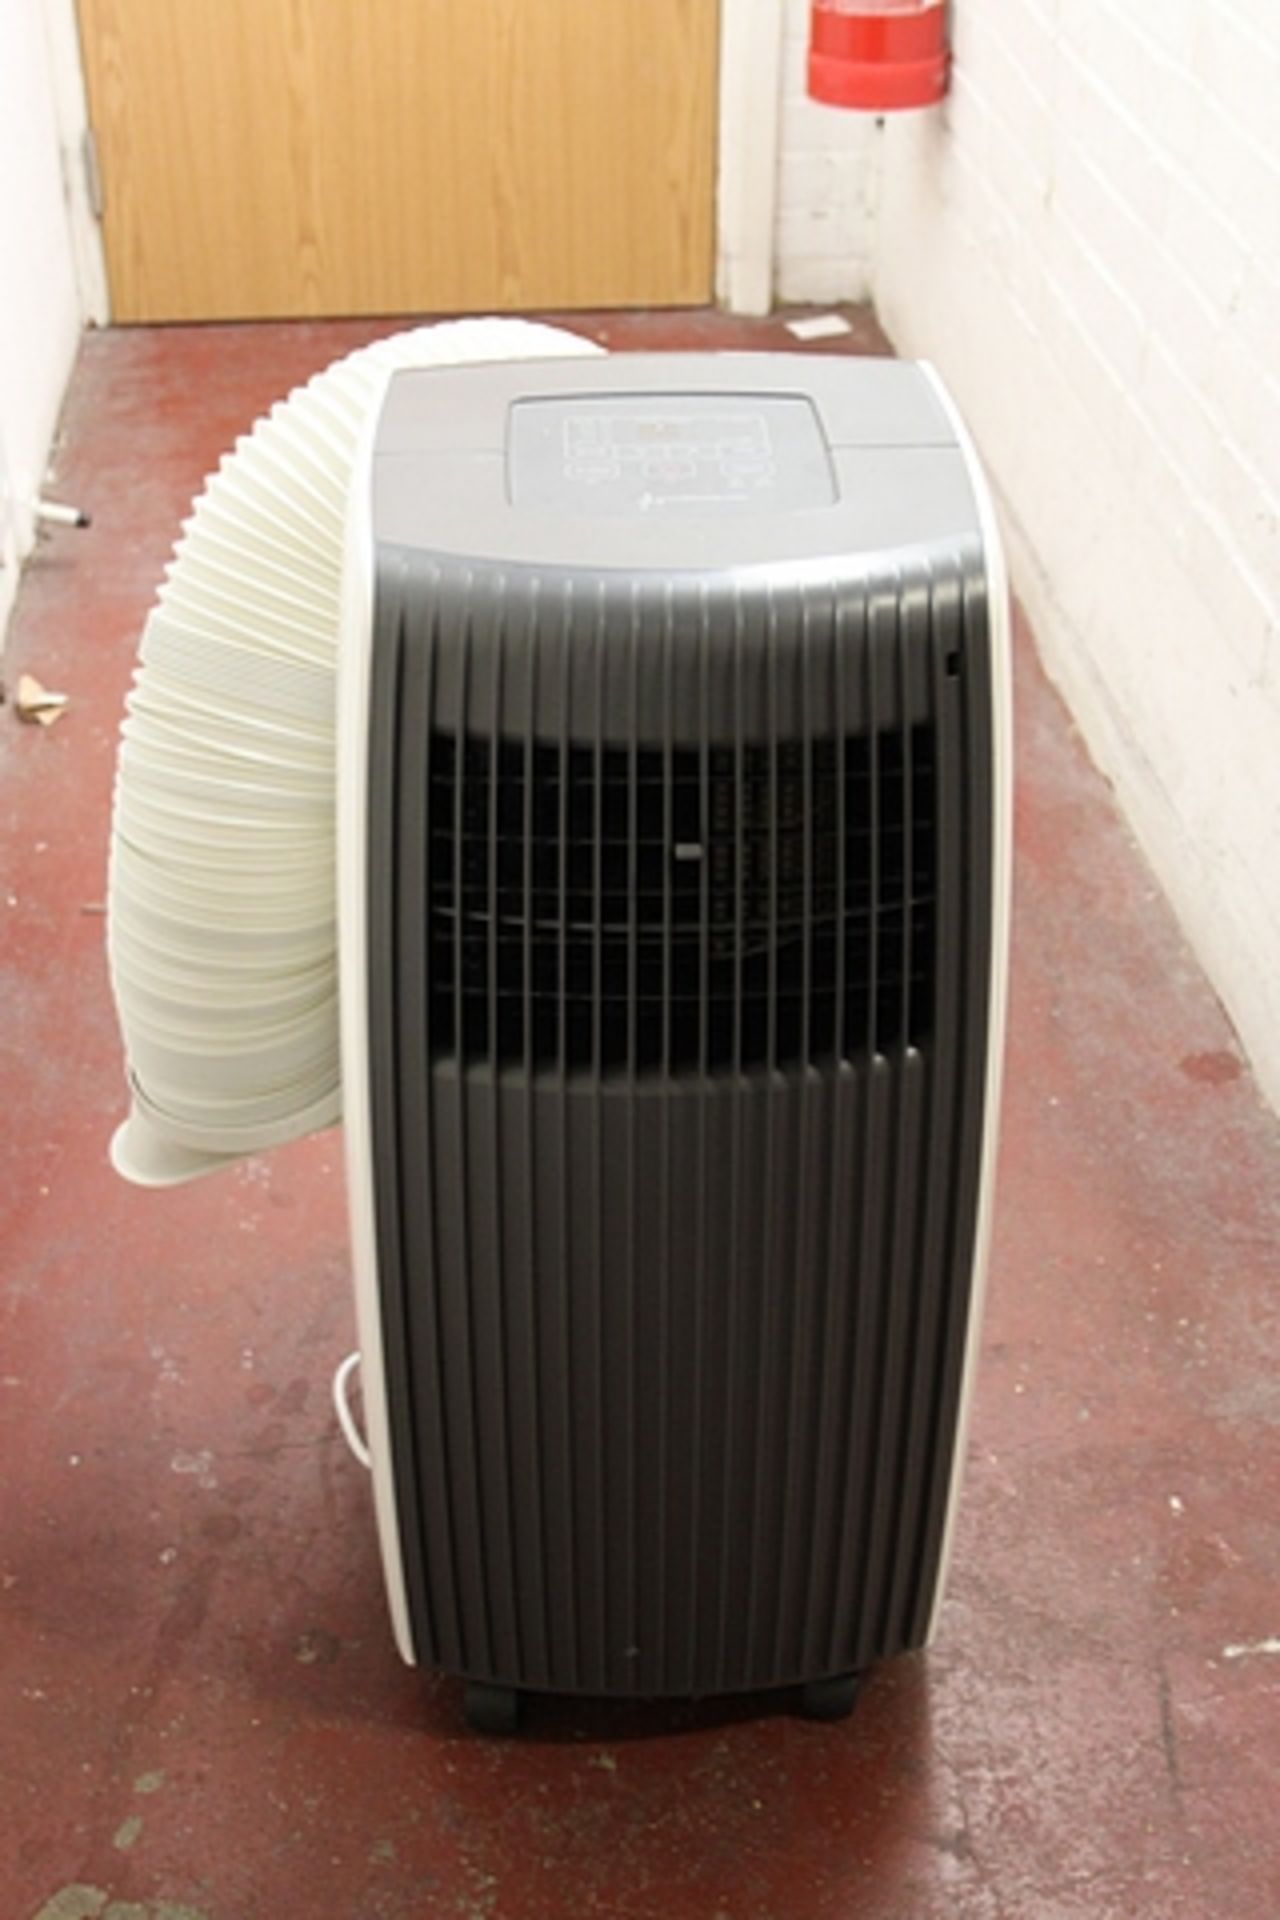 KYR-25CO/X1c portable air conditioning unit cooling capacity 9000 (2.5kW) 350mm x 300mm x 760mm (x2)